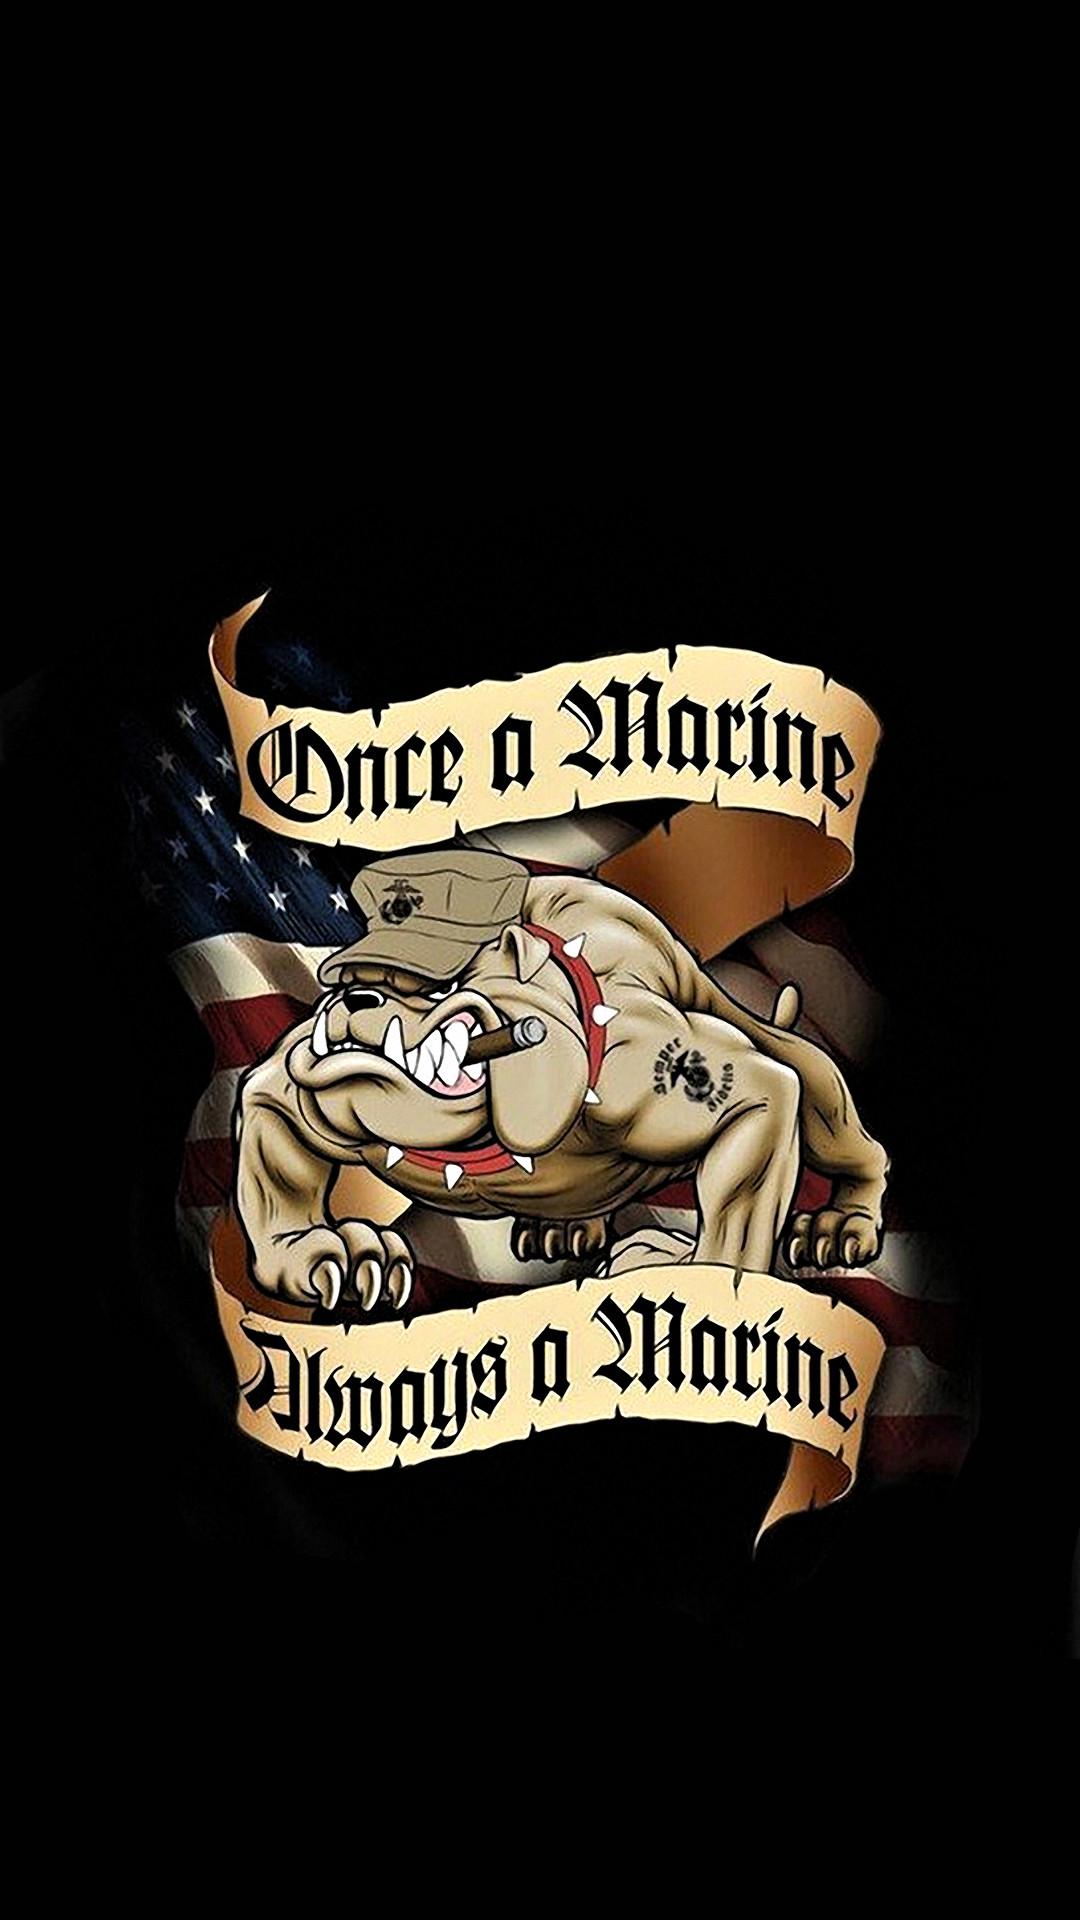 1080x1920 USMC wallpaper? - Android Forums at AndroidCentral.com